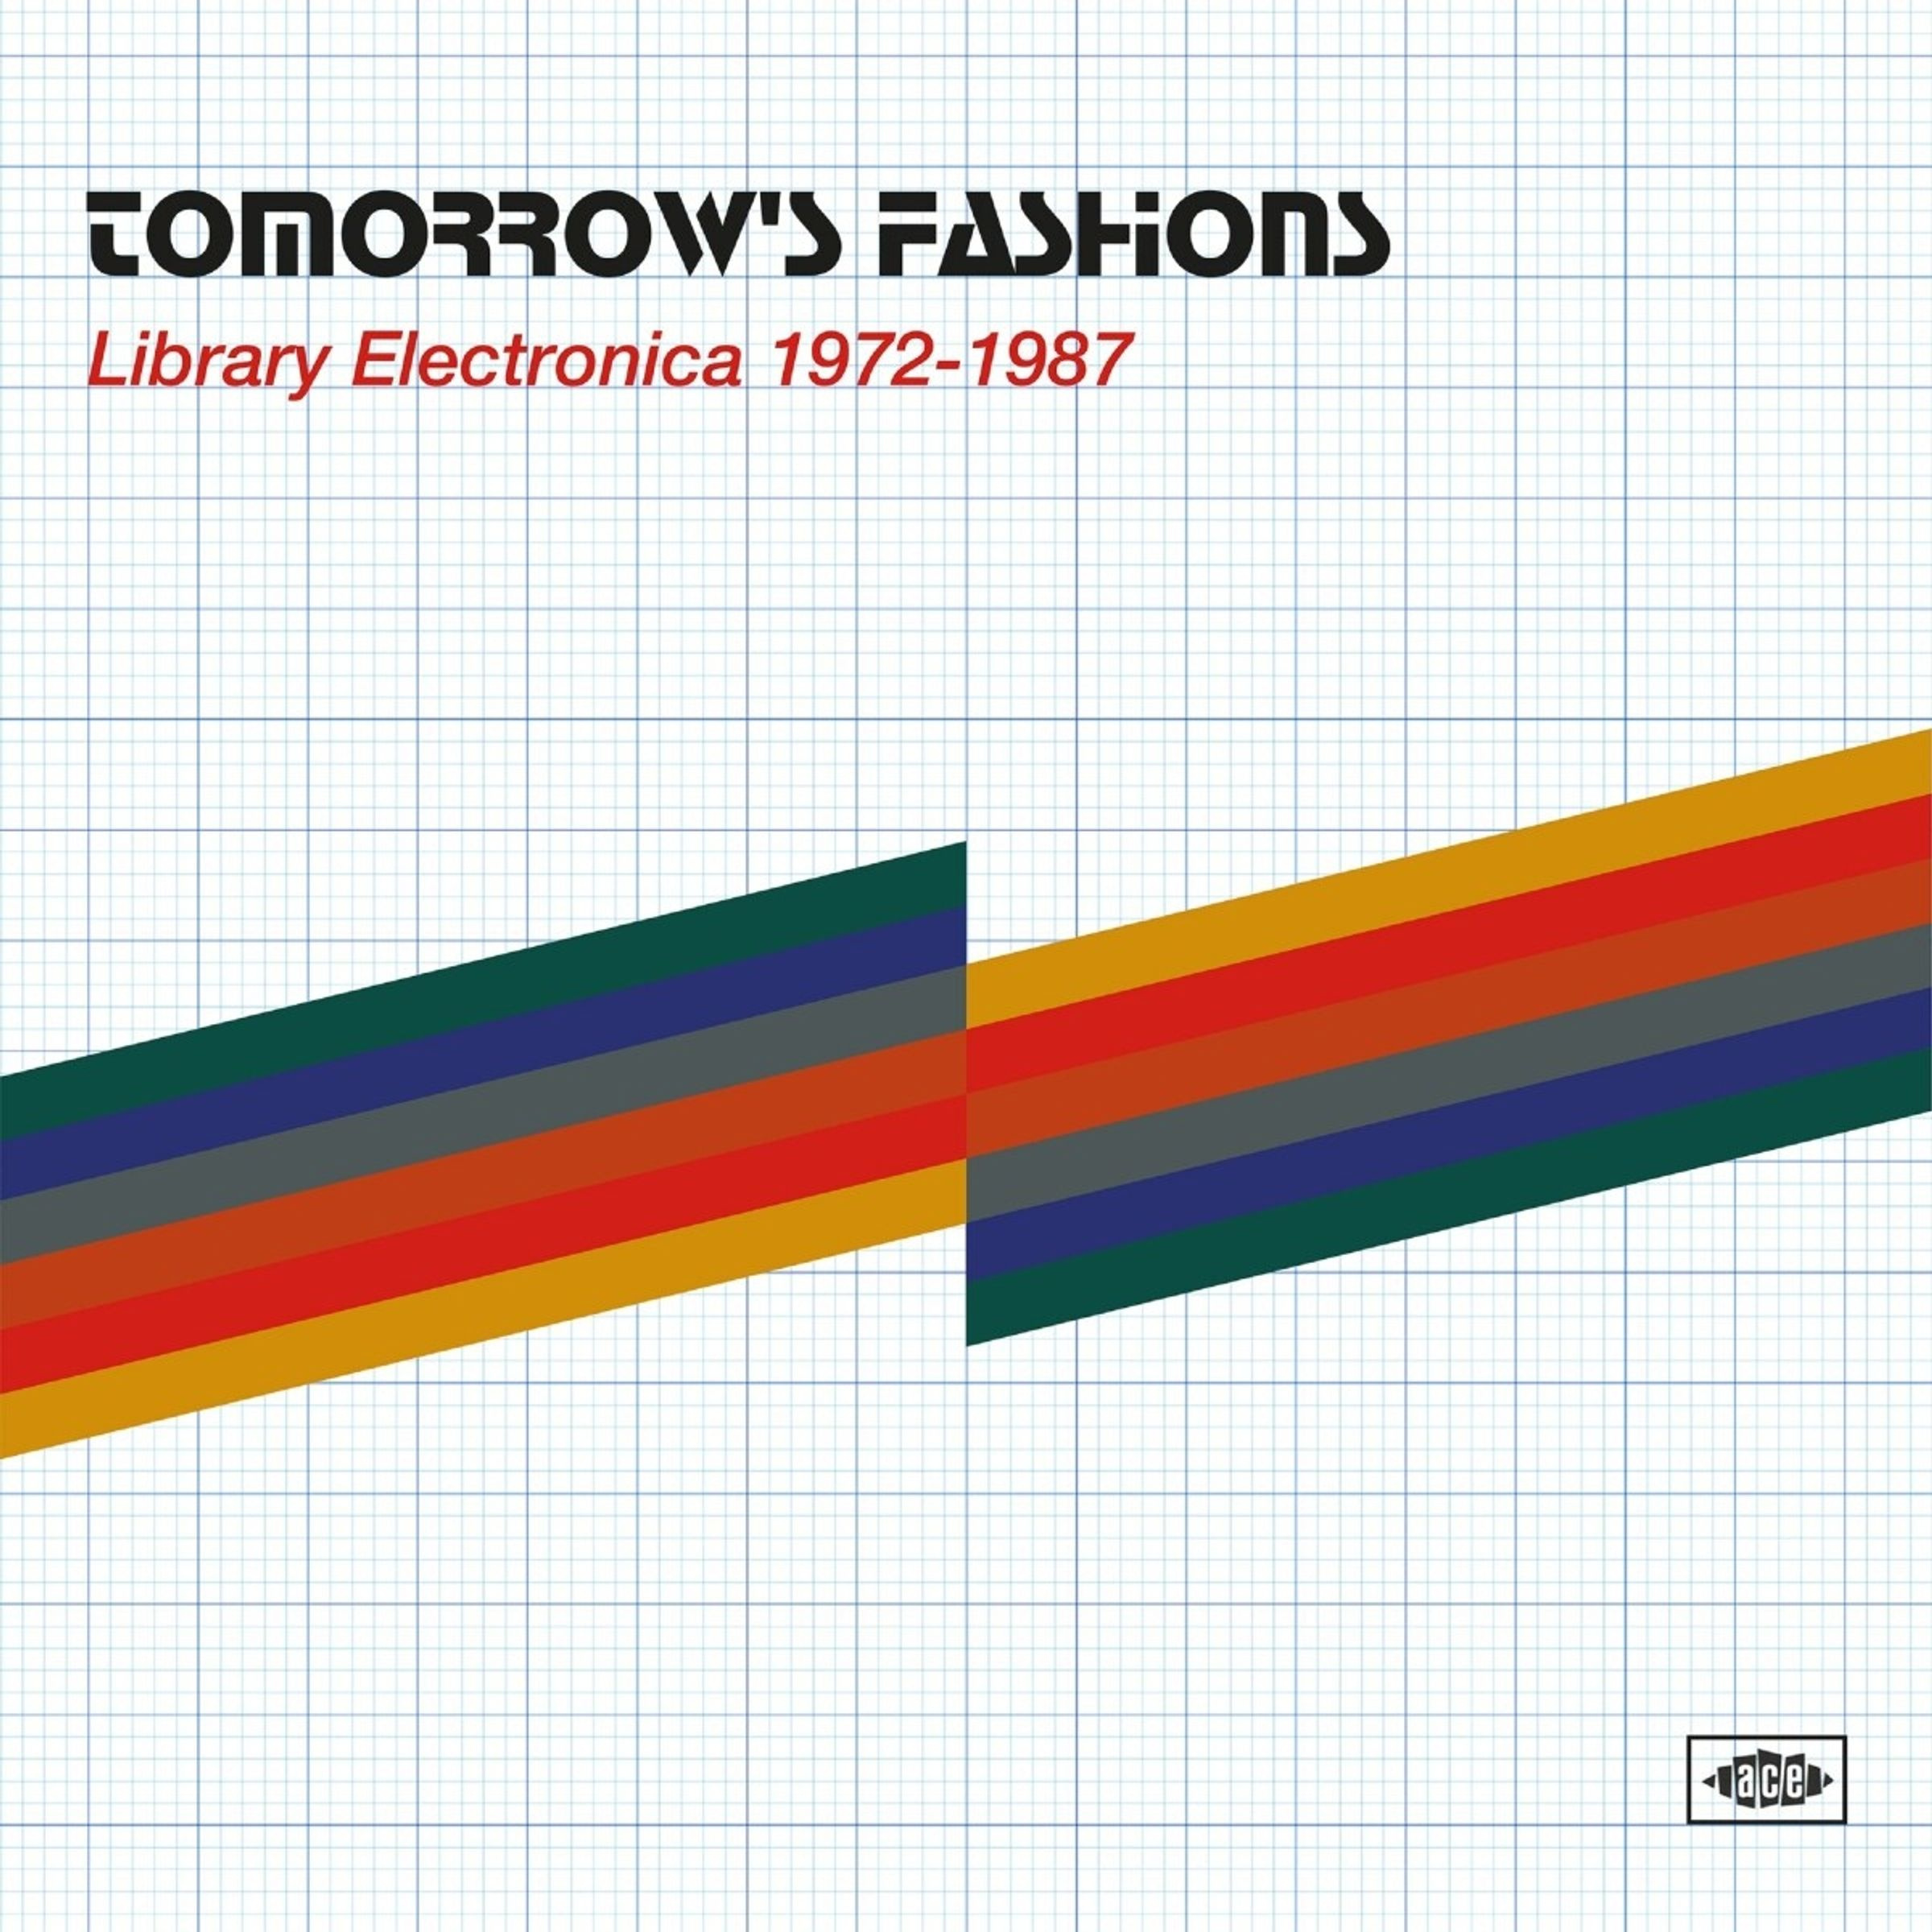 TOMORROW S FASHIONS: LIBRARY ELECTRONICA